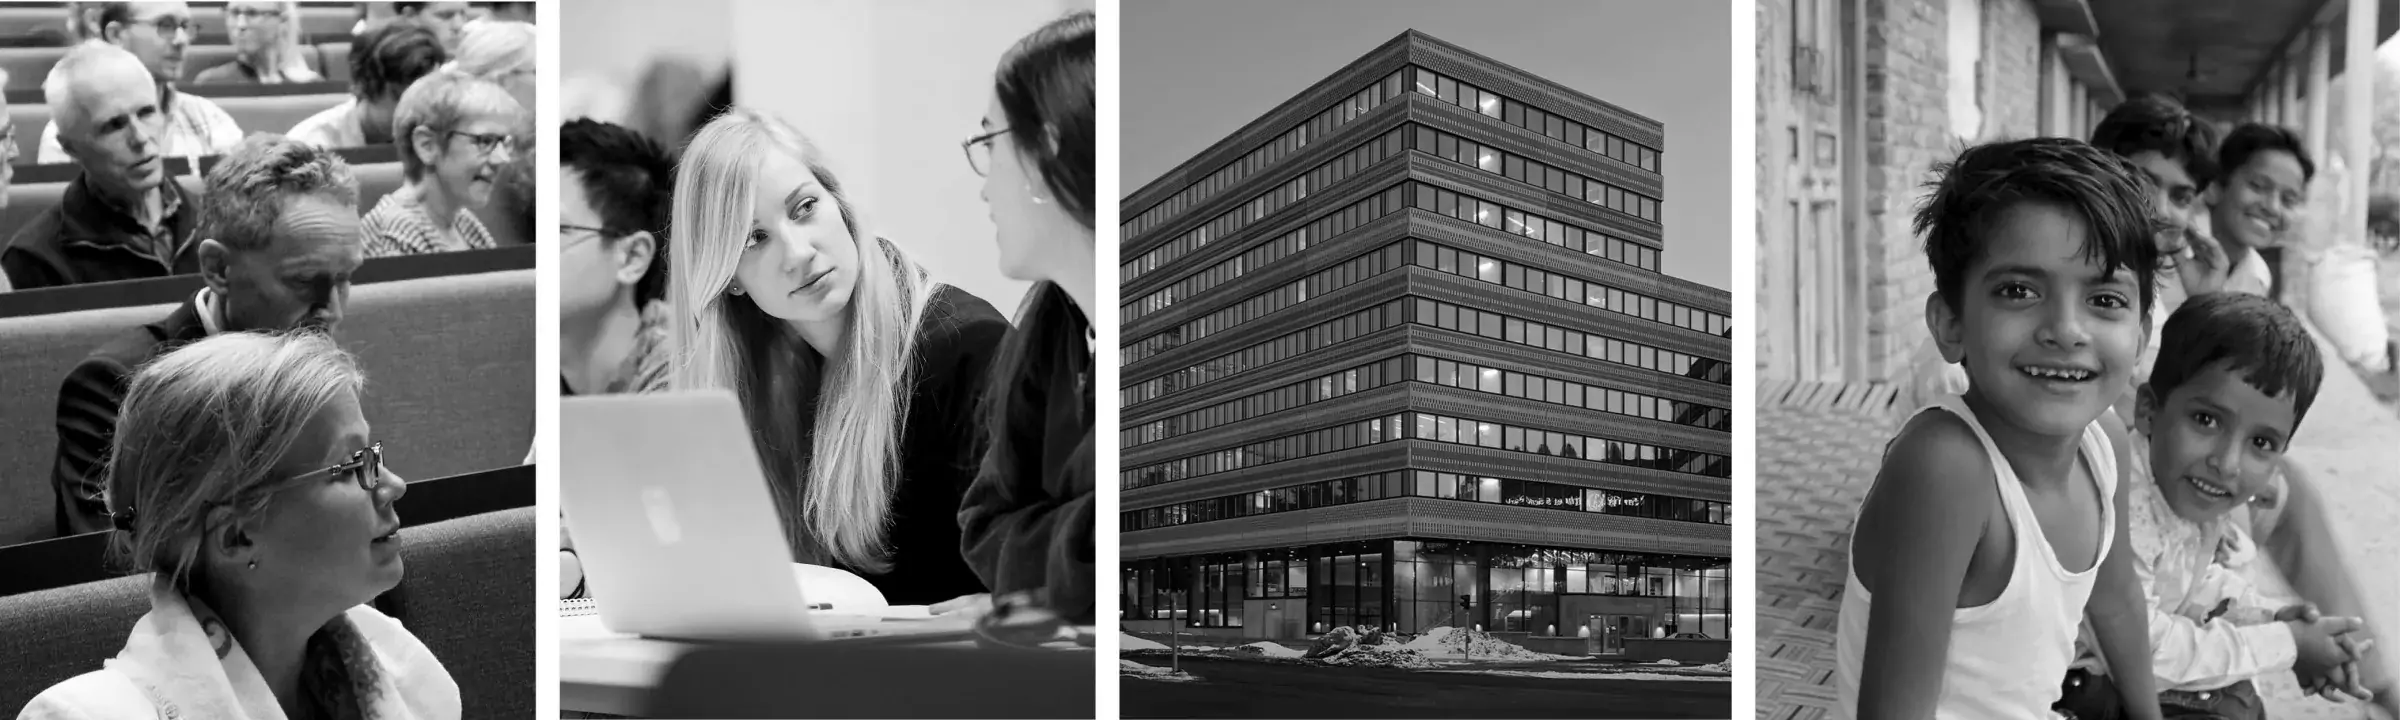 Collage of images of: research group leaders, students, Widerström building and children in Asia.